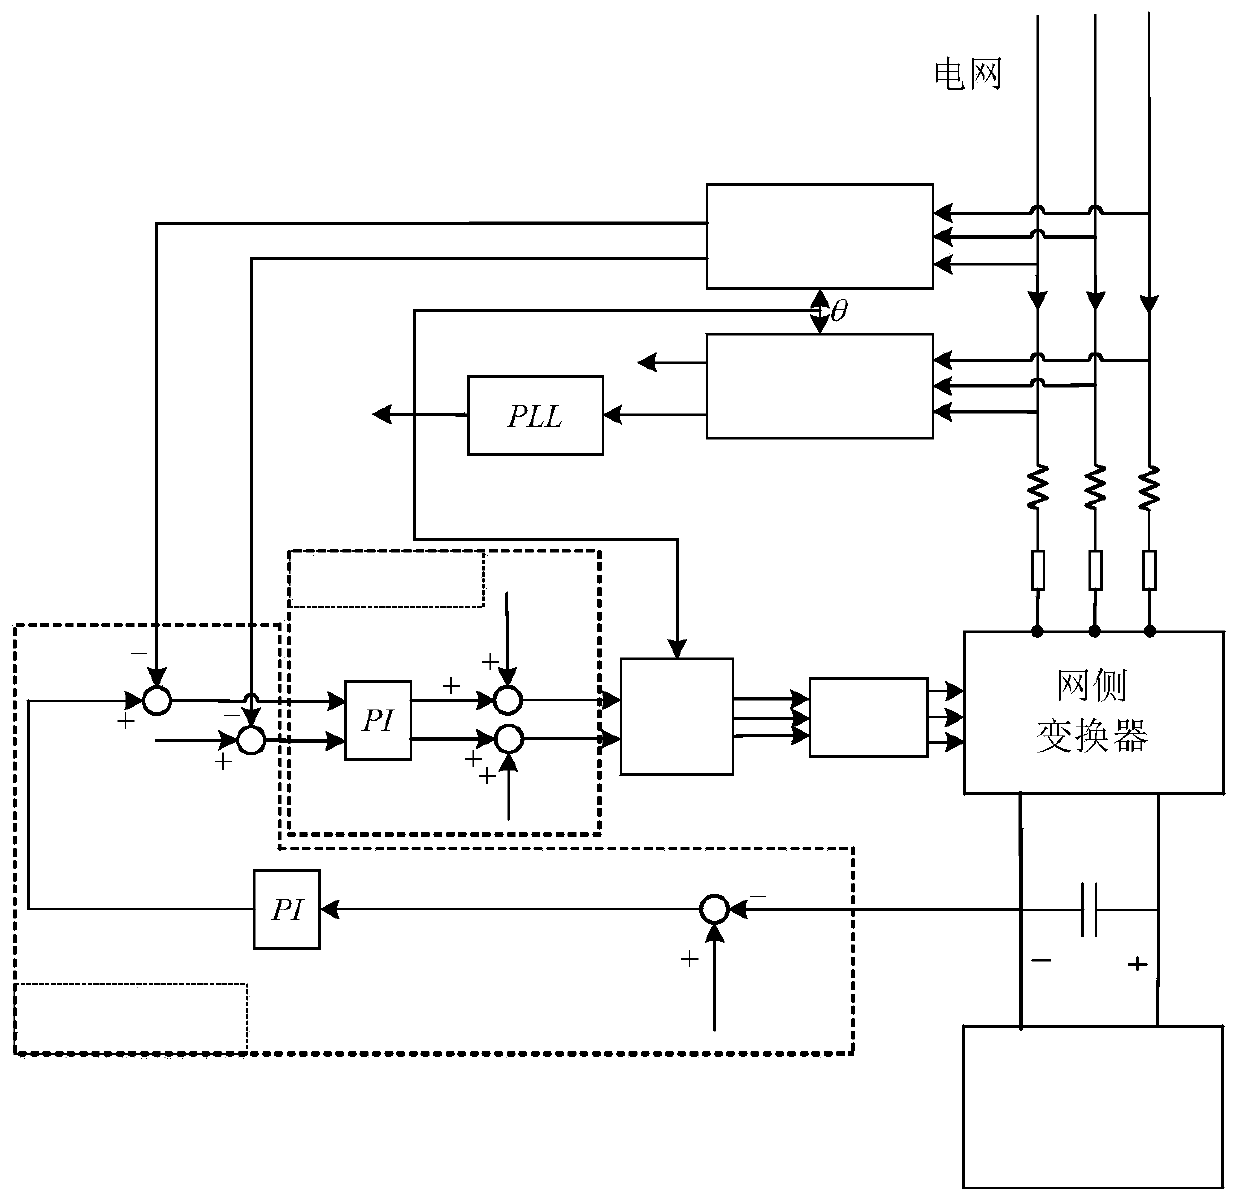 Additional damping control doubly-fed fan grid-connected sub-super-synchronous oscillation suppression method